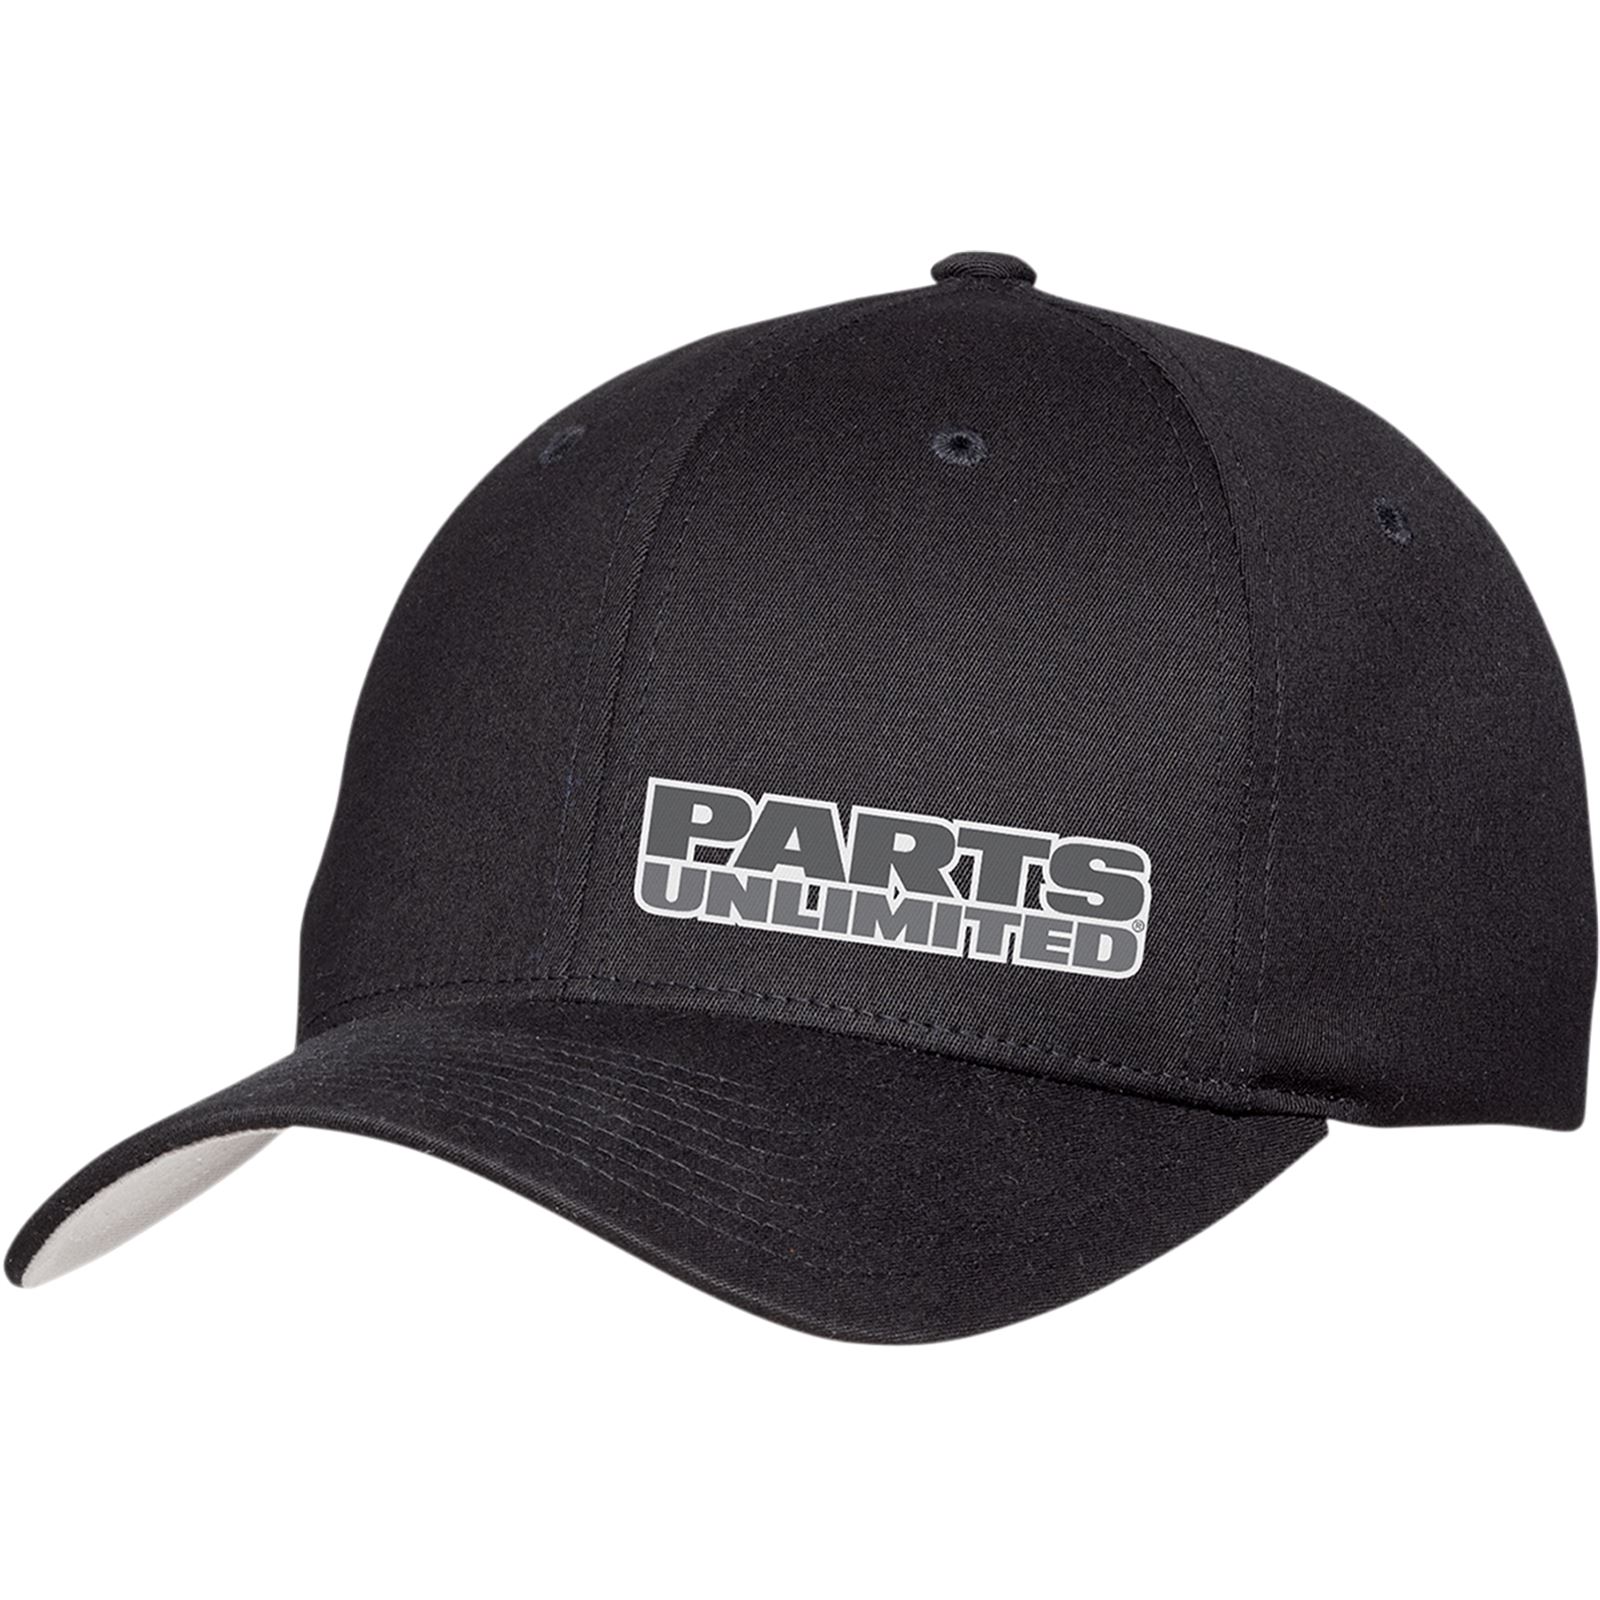 Throttle Threads Parts Unlimited Curved Bill Hat - Black - Small/Medium